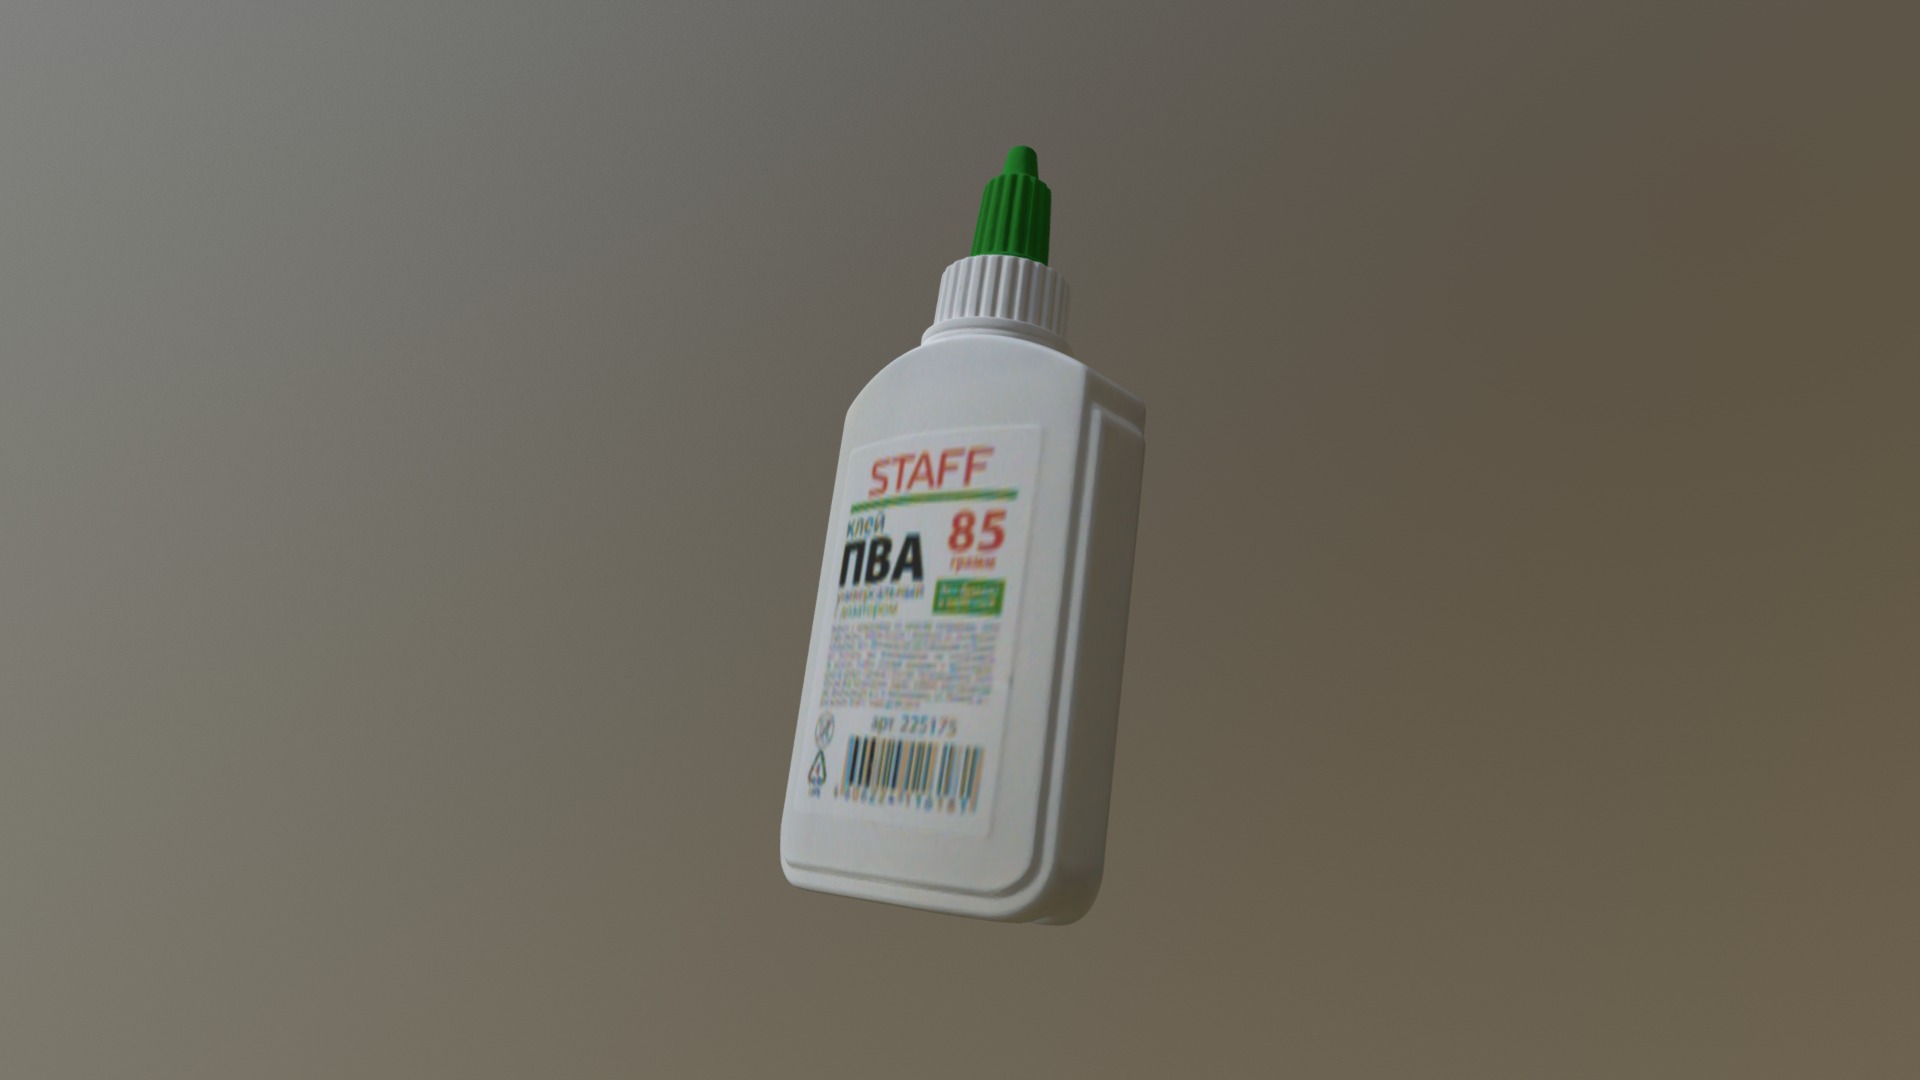 3D model Pva glue bottle - This is a 3D model of the Pva glue bottle. The 3D model is about a white bottle with a green cap.